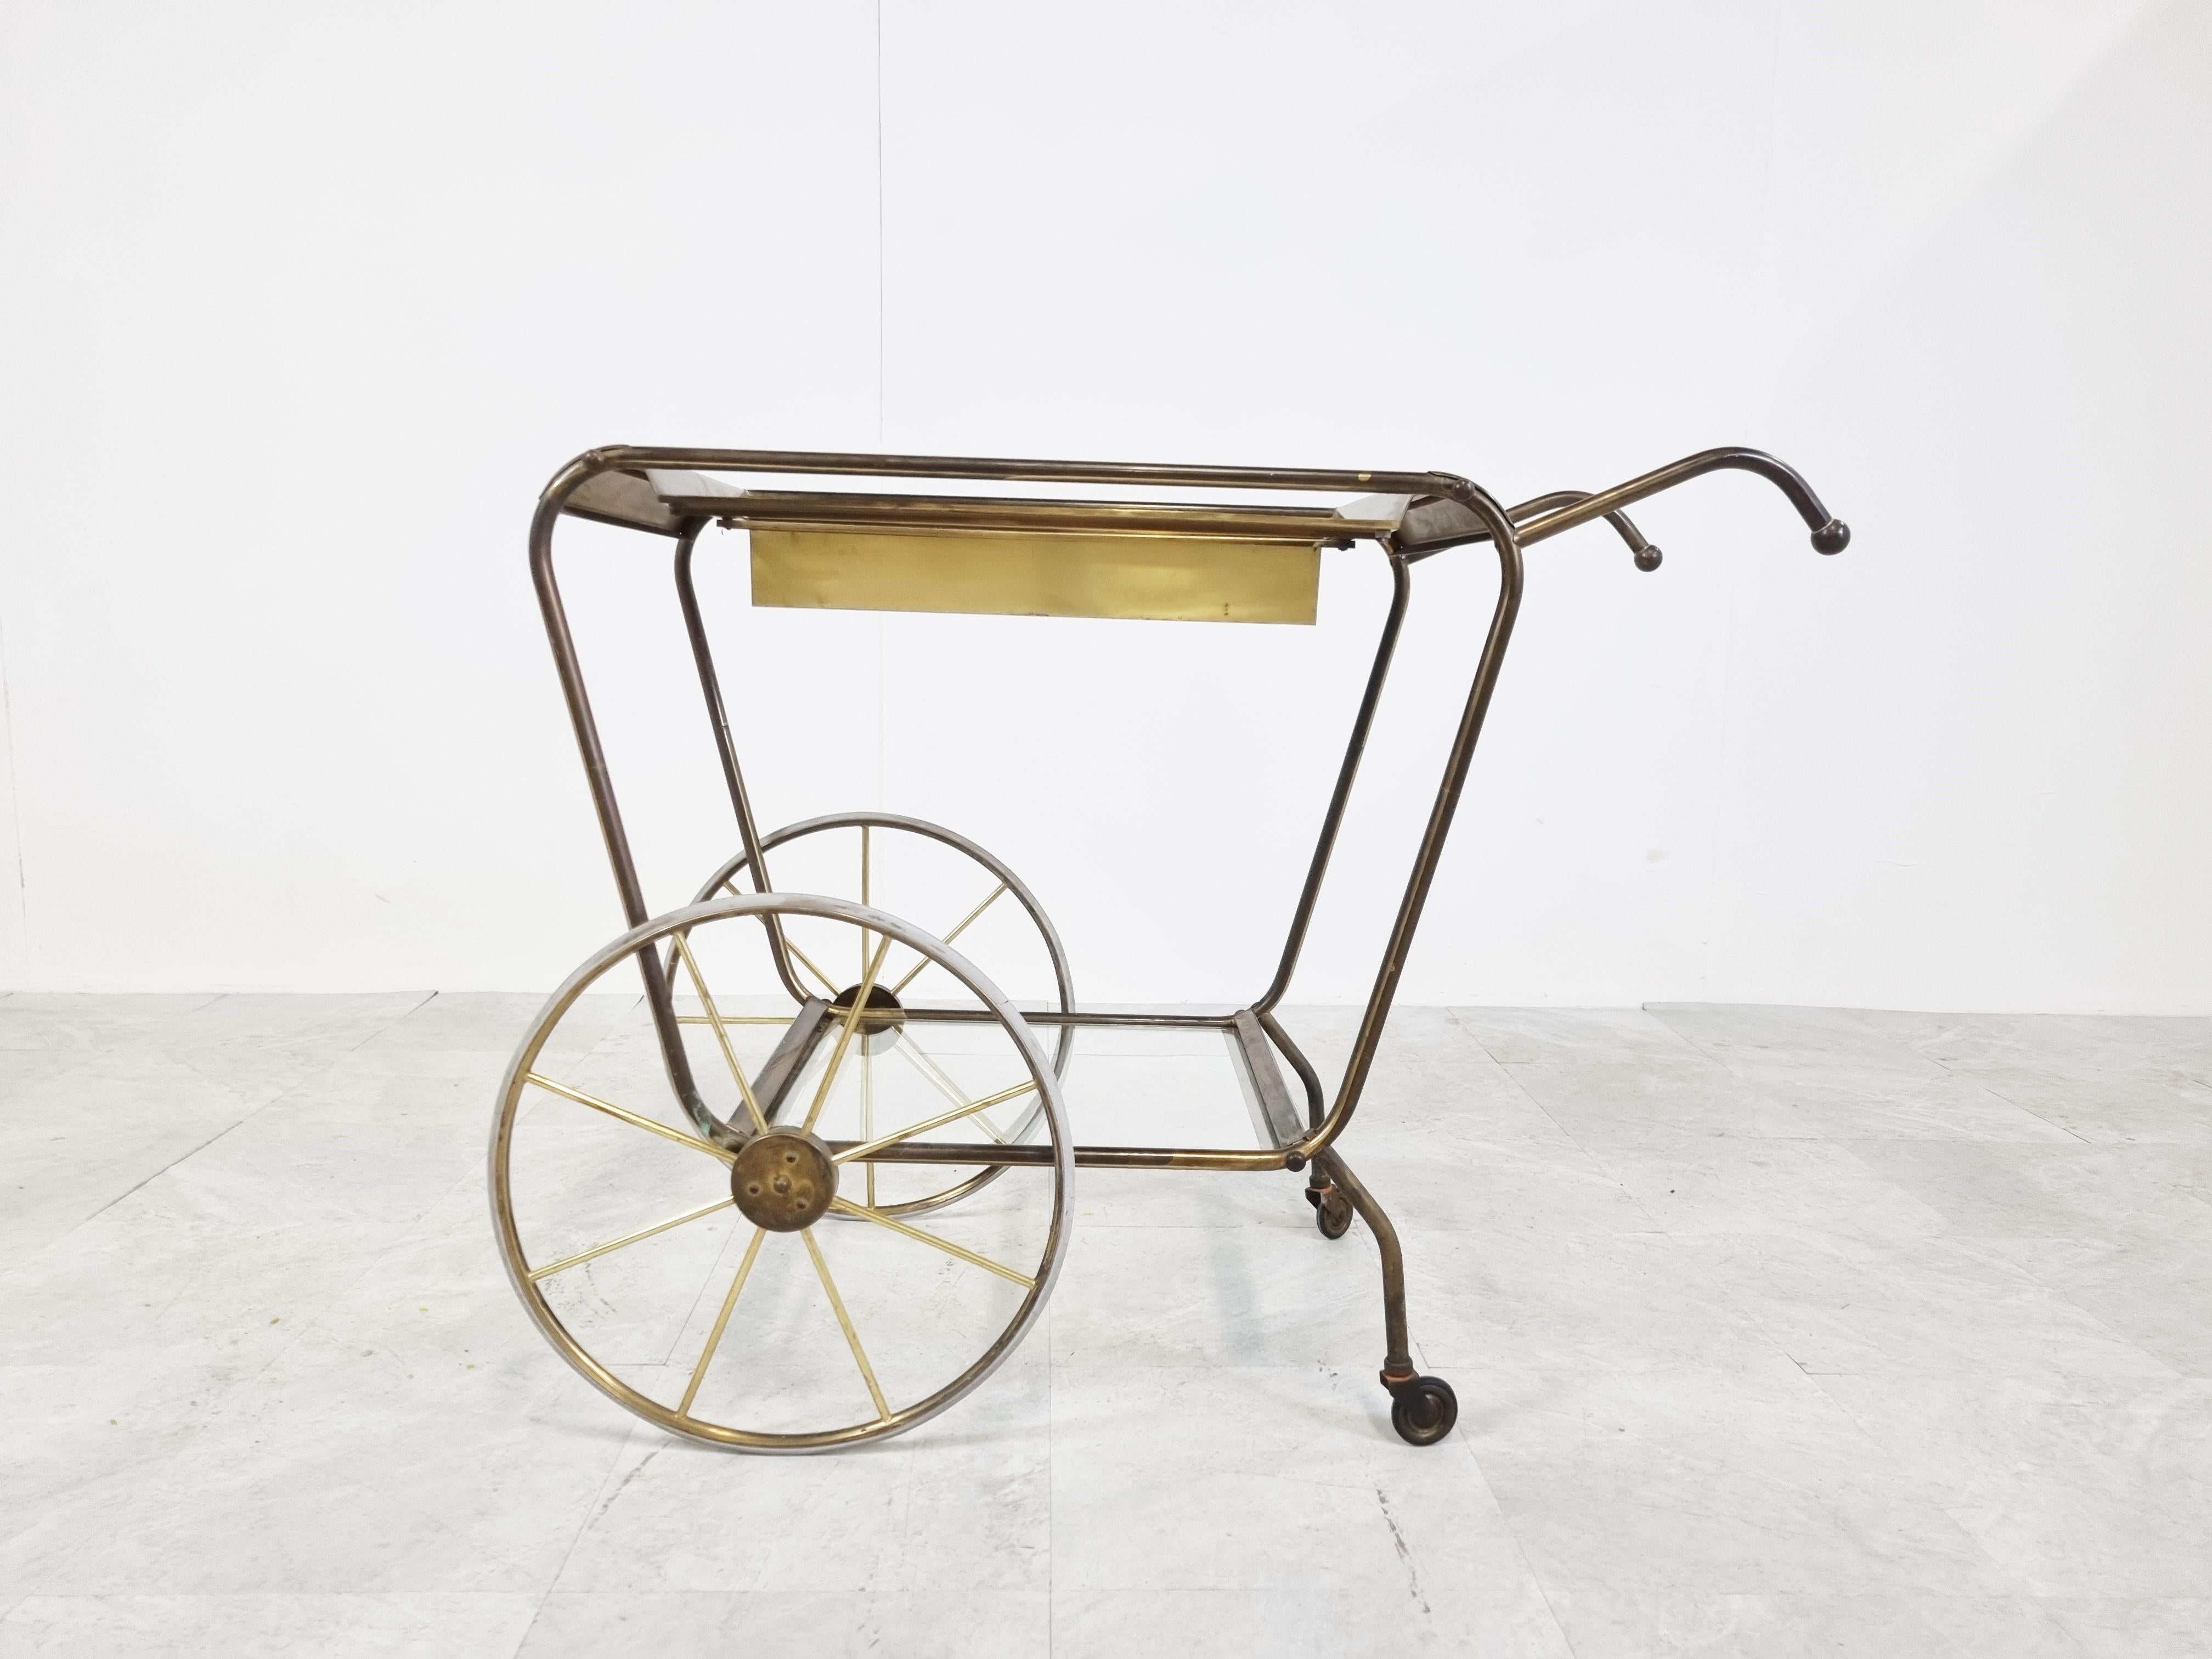 Very elegant and beautifully patinated brass bar cart or serving trolley very much in the style of Josef Frank.

It has an integrated bottle holder and glass shelves.

Still rolls smoothly after 70 years

1950s- France

Good condition with